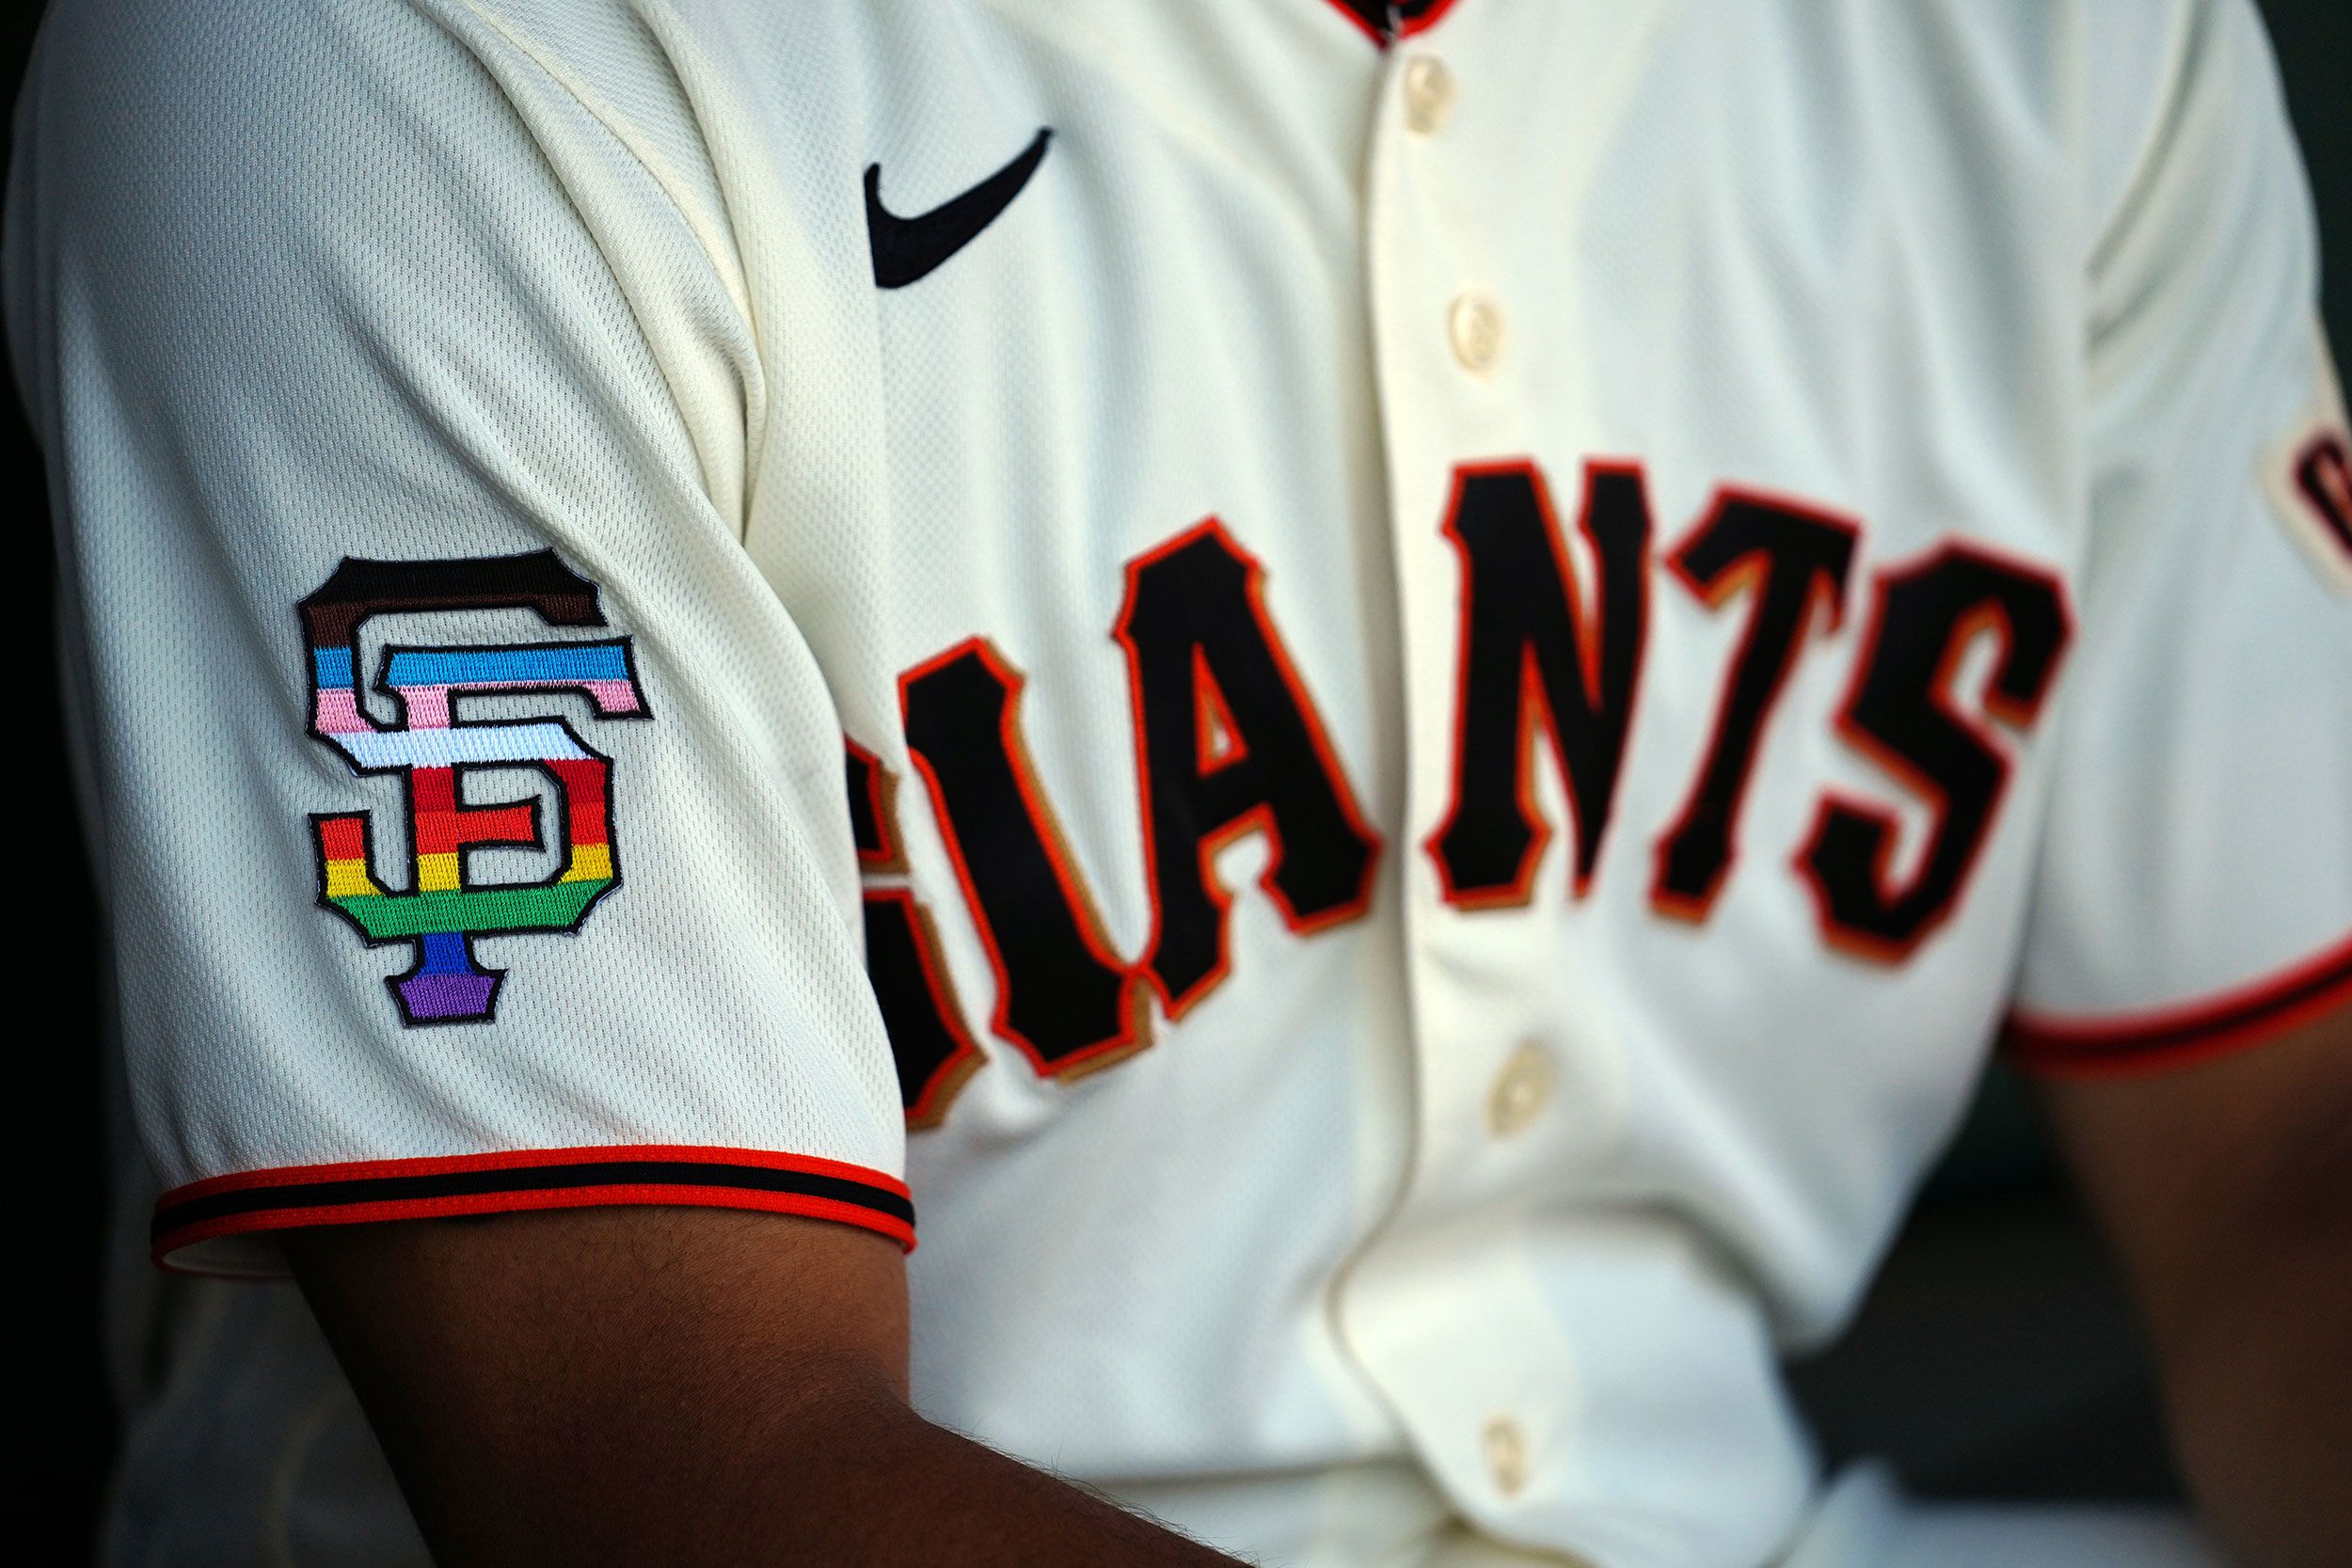 San Francisco Giants to be first MLB team to play in Pride uniforms - CBS  News